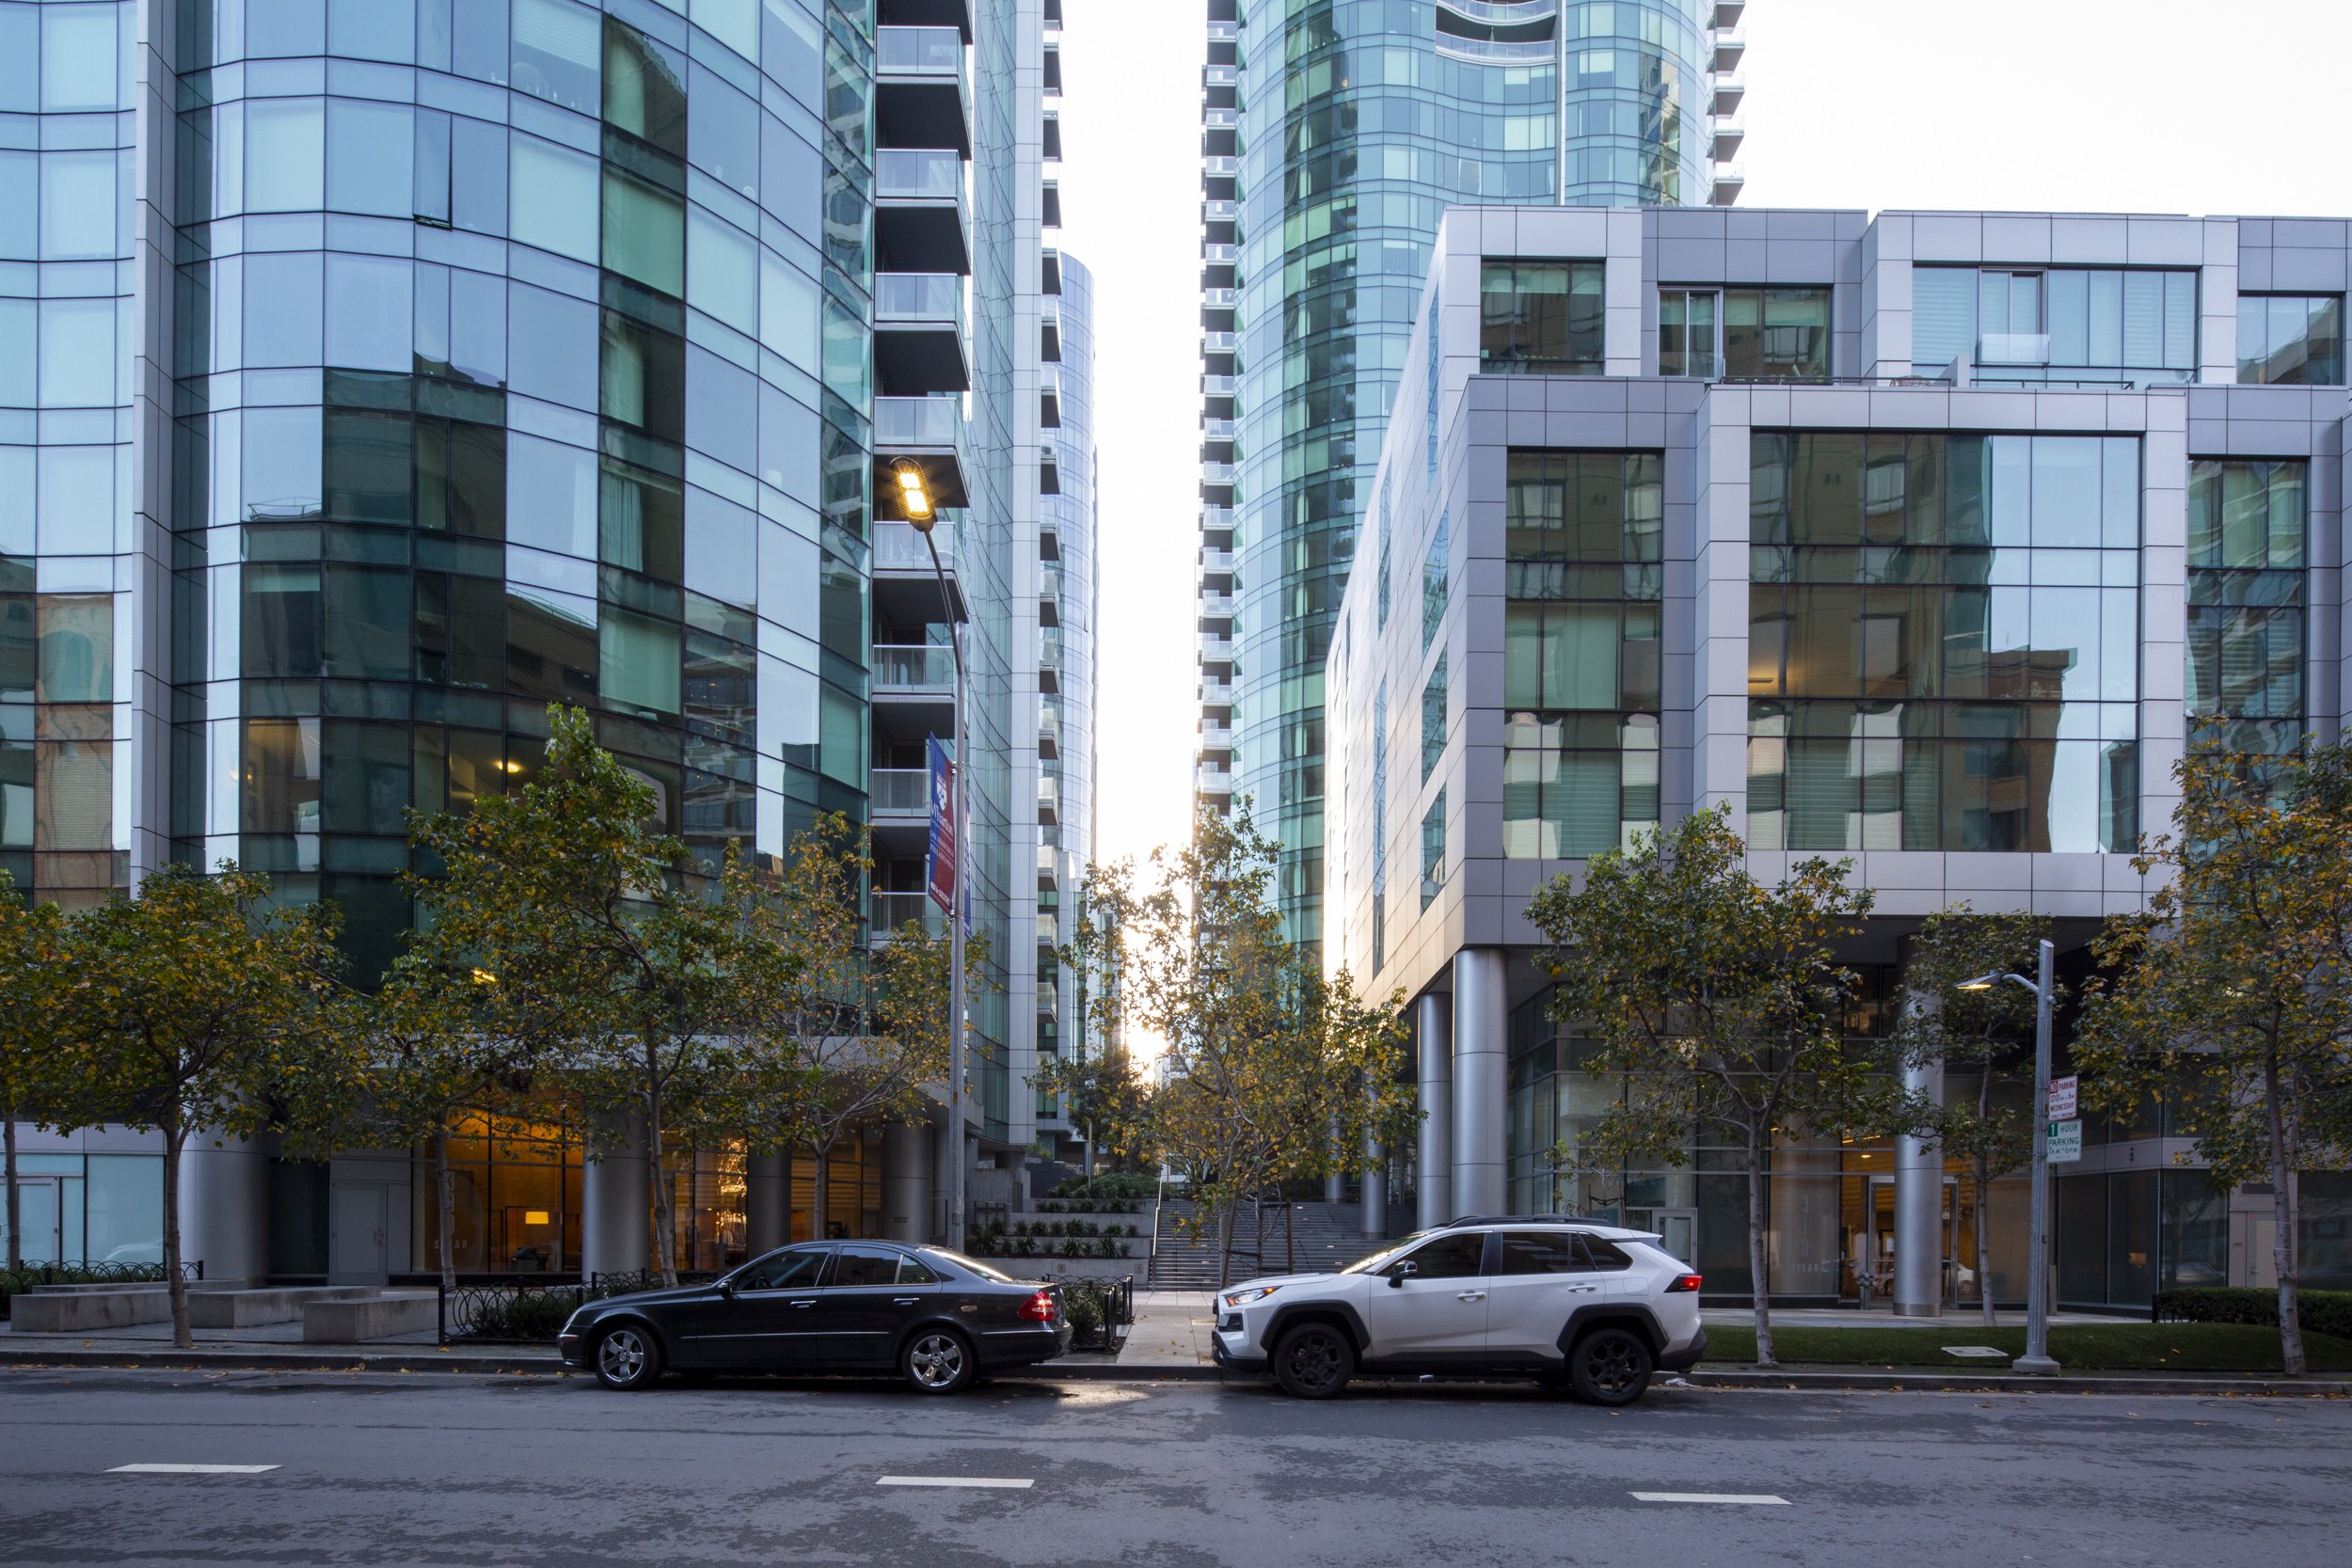 The interior courtyard of The Infinity SF development, image by Andrew Campbell Nelson